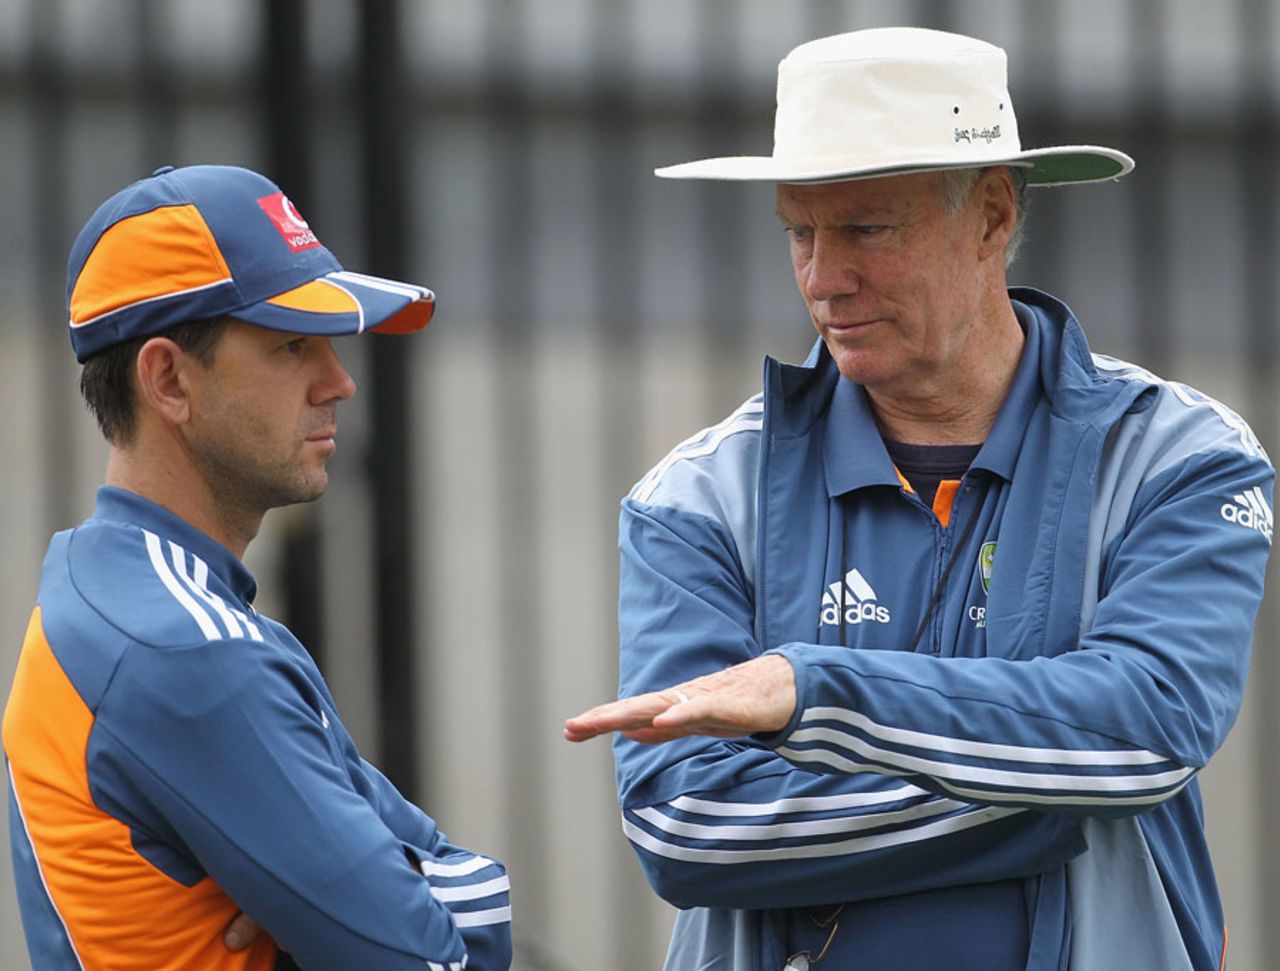 Ricky Ponting and Greg Chappell discuss a point at Australia's training session, December 25, 2010